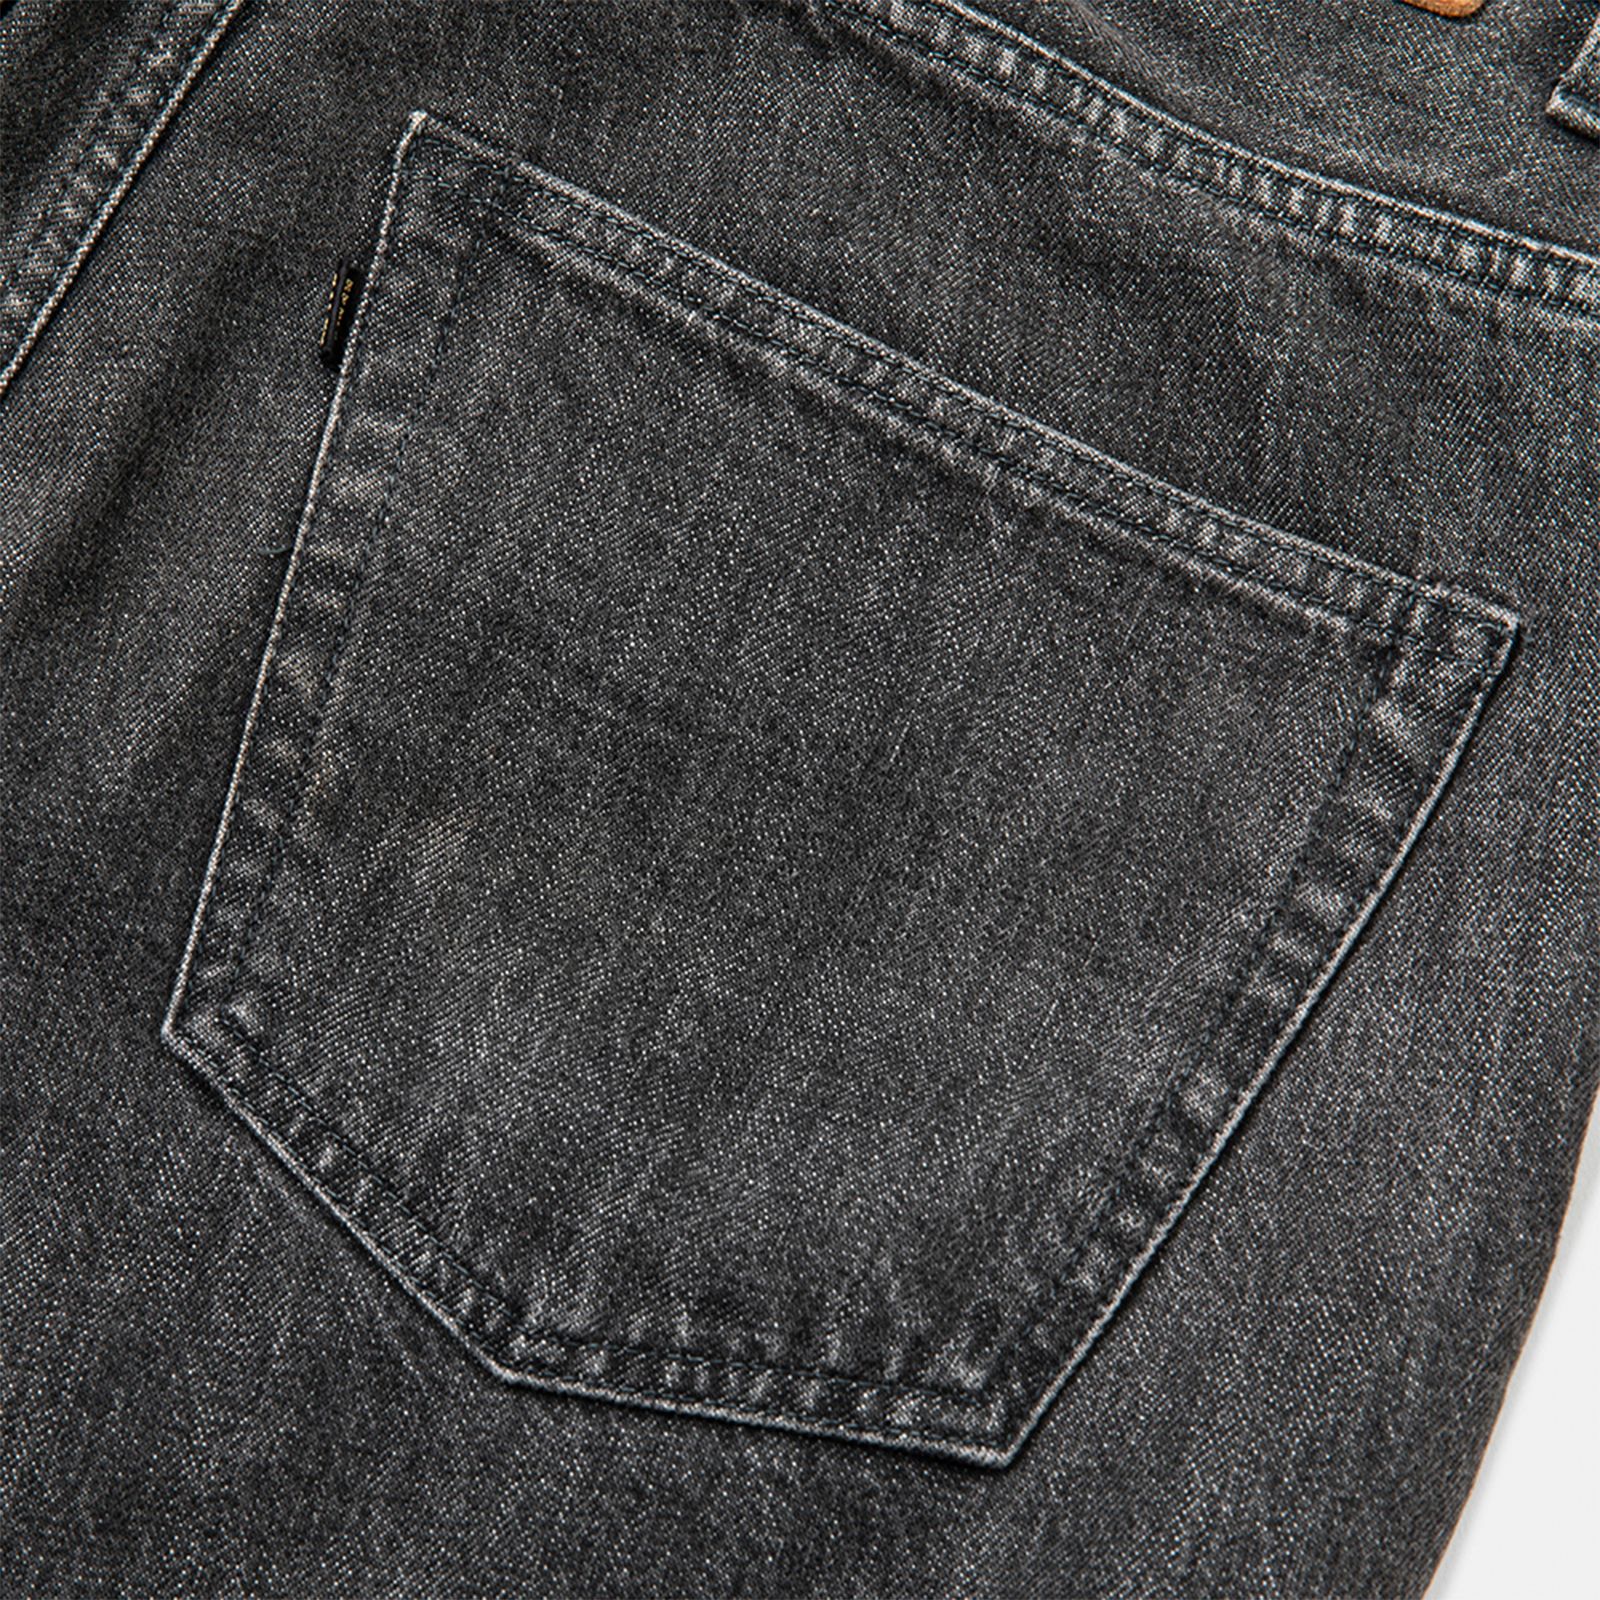 CALEE - [ラスト1点 32 ] Vintage reproduct wide silhouette denim